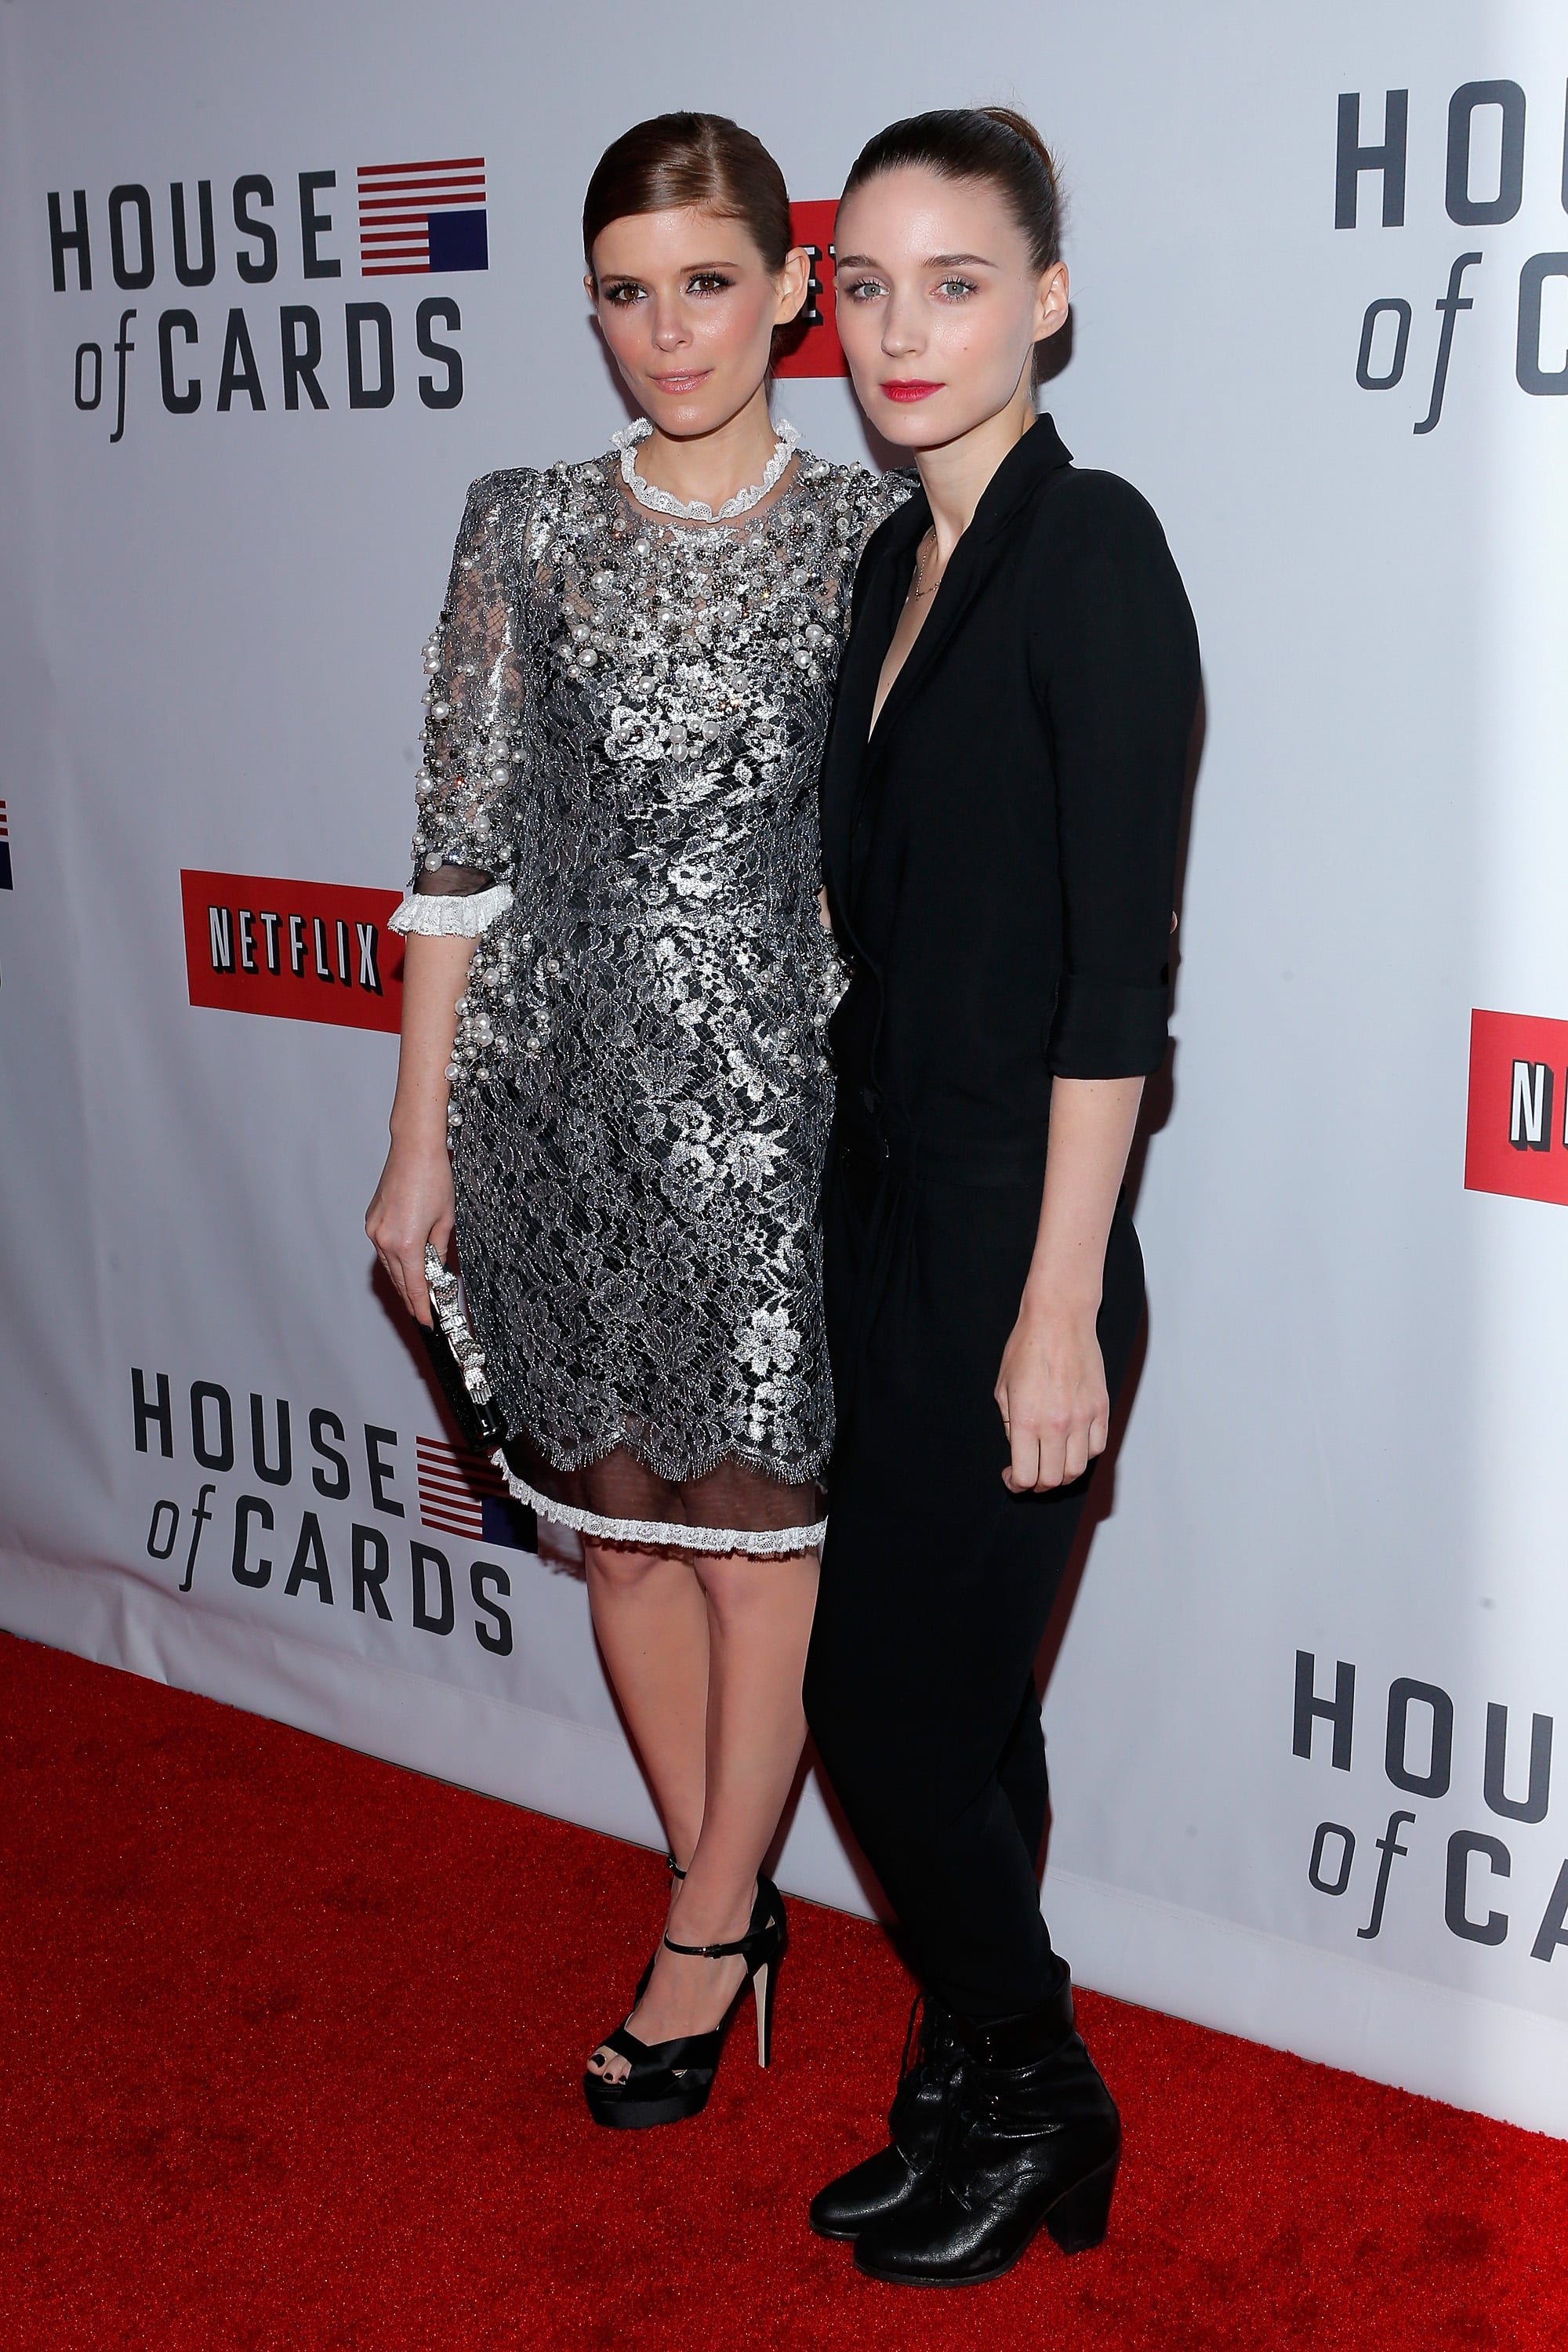 Rooney and Kate Mara | All in the Family: Our Favorite Style-Setting